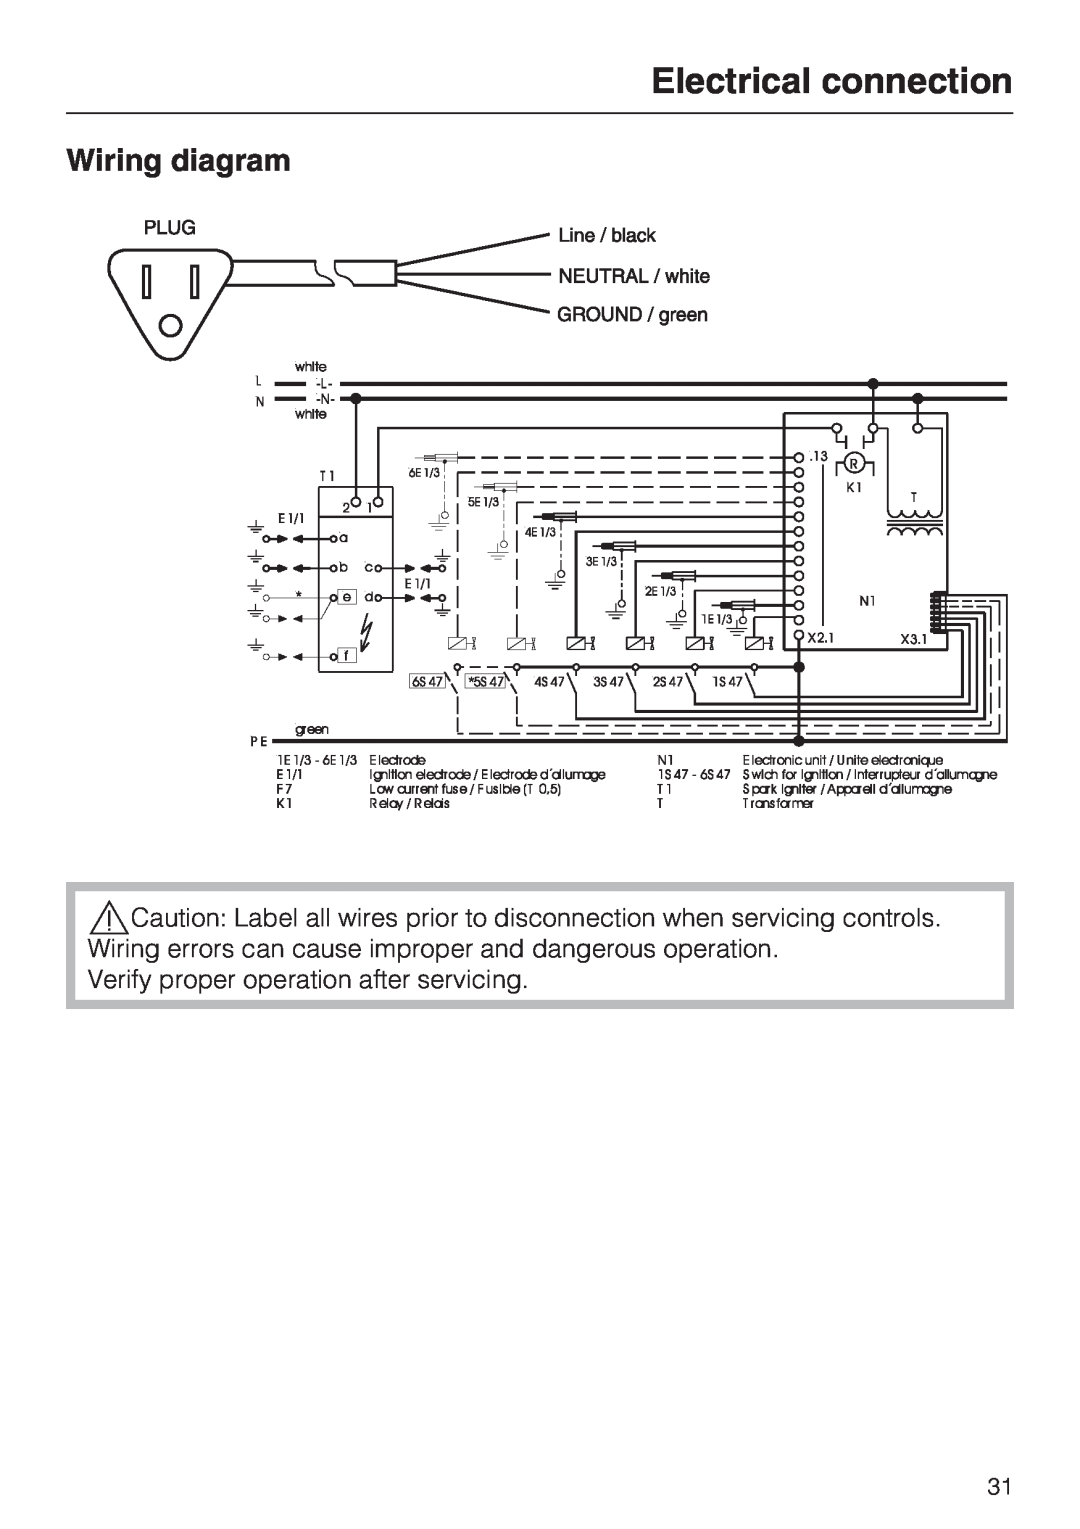 Miele KM 3474, KM 3475, KM 3485, KM 3484 Wiring diagram, Electrical connection, Verify proper operation after servicing 